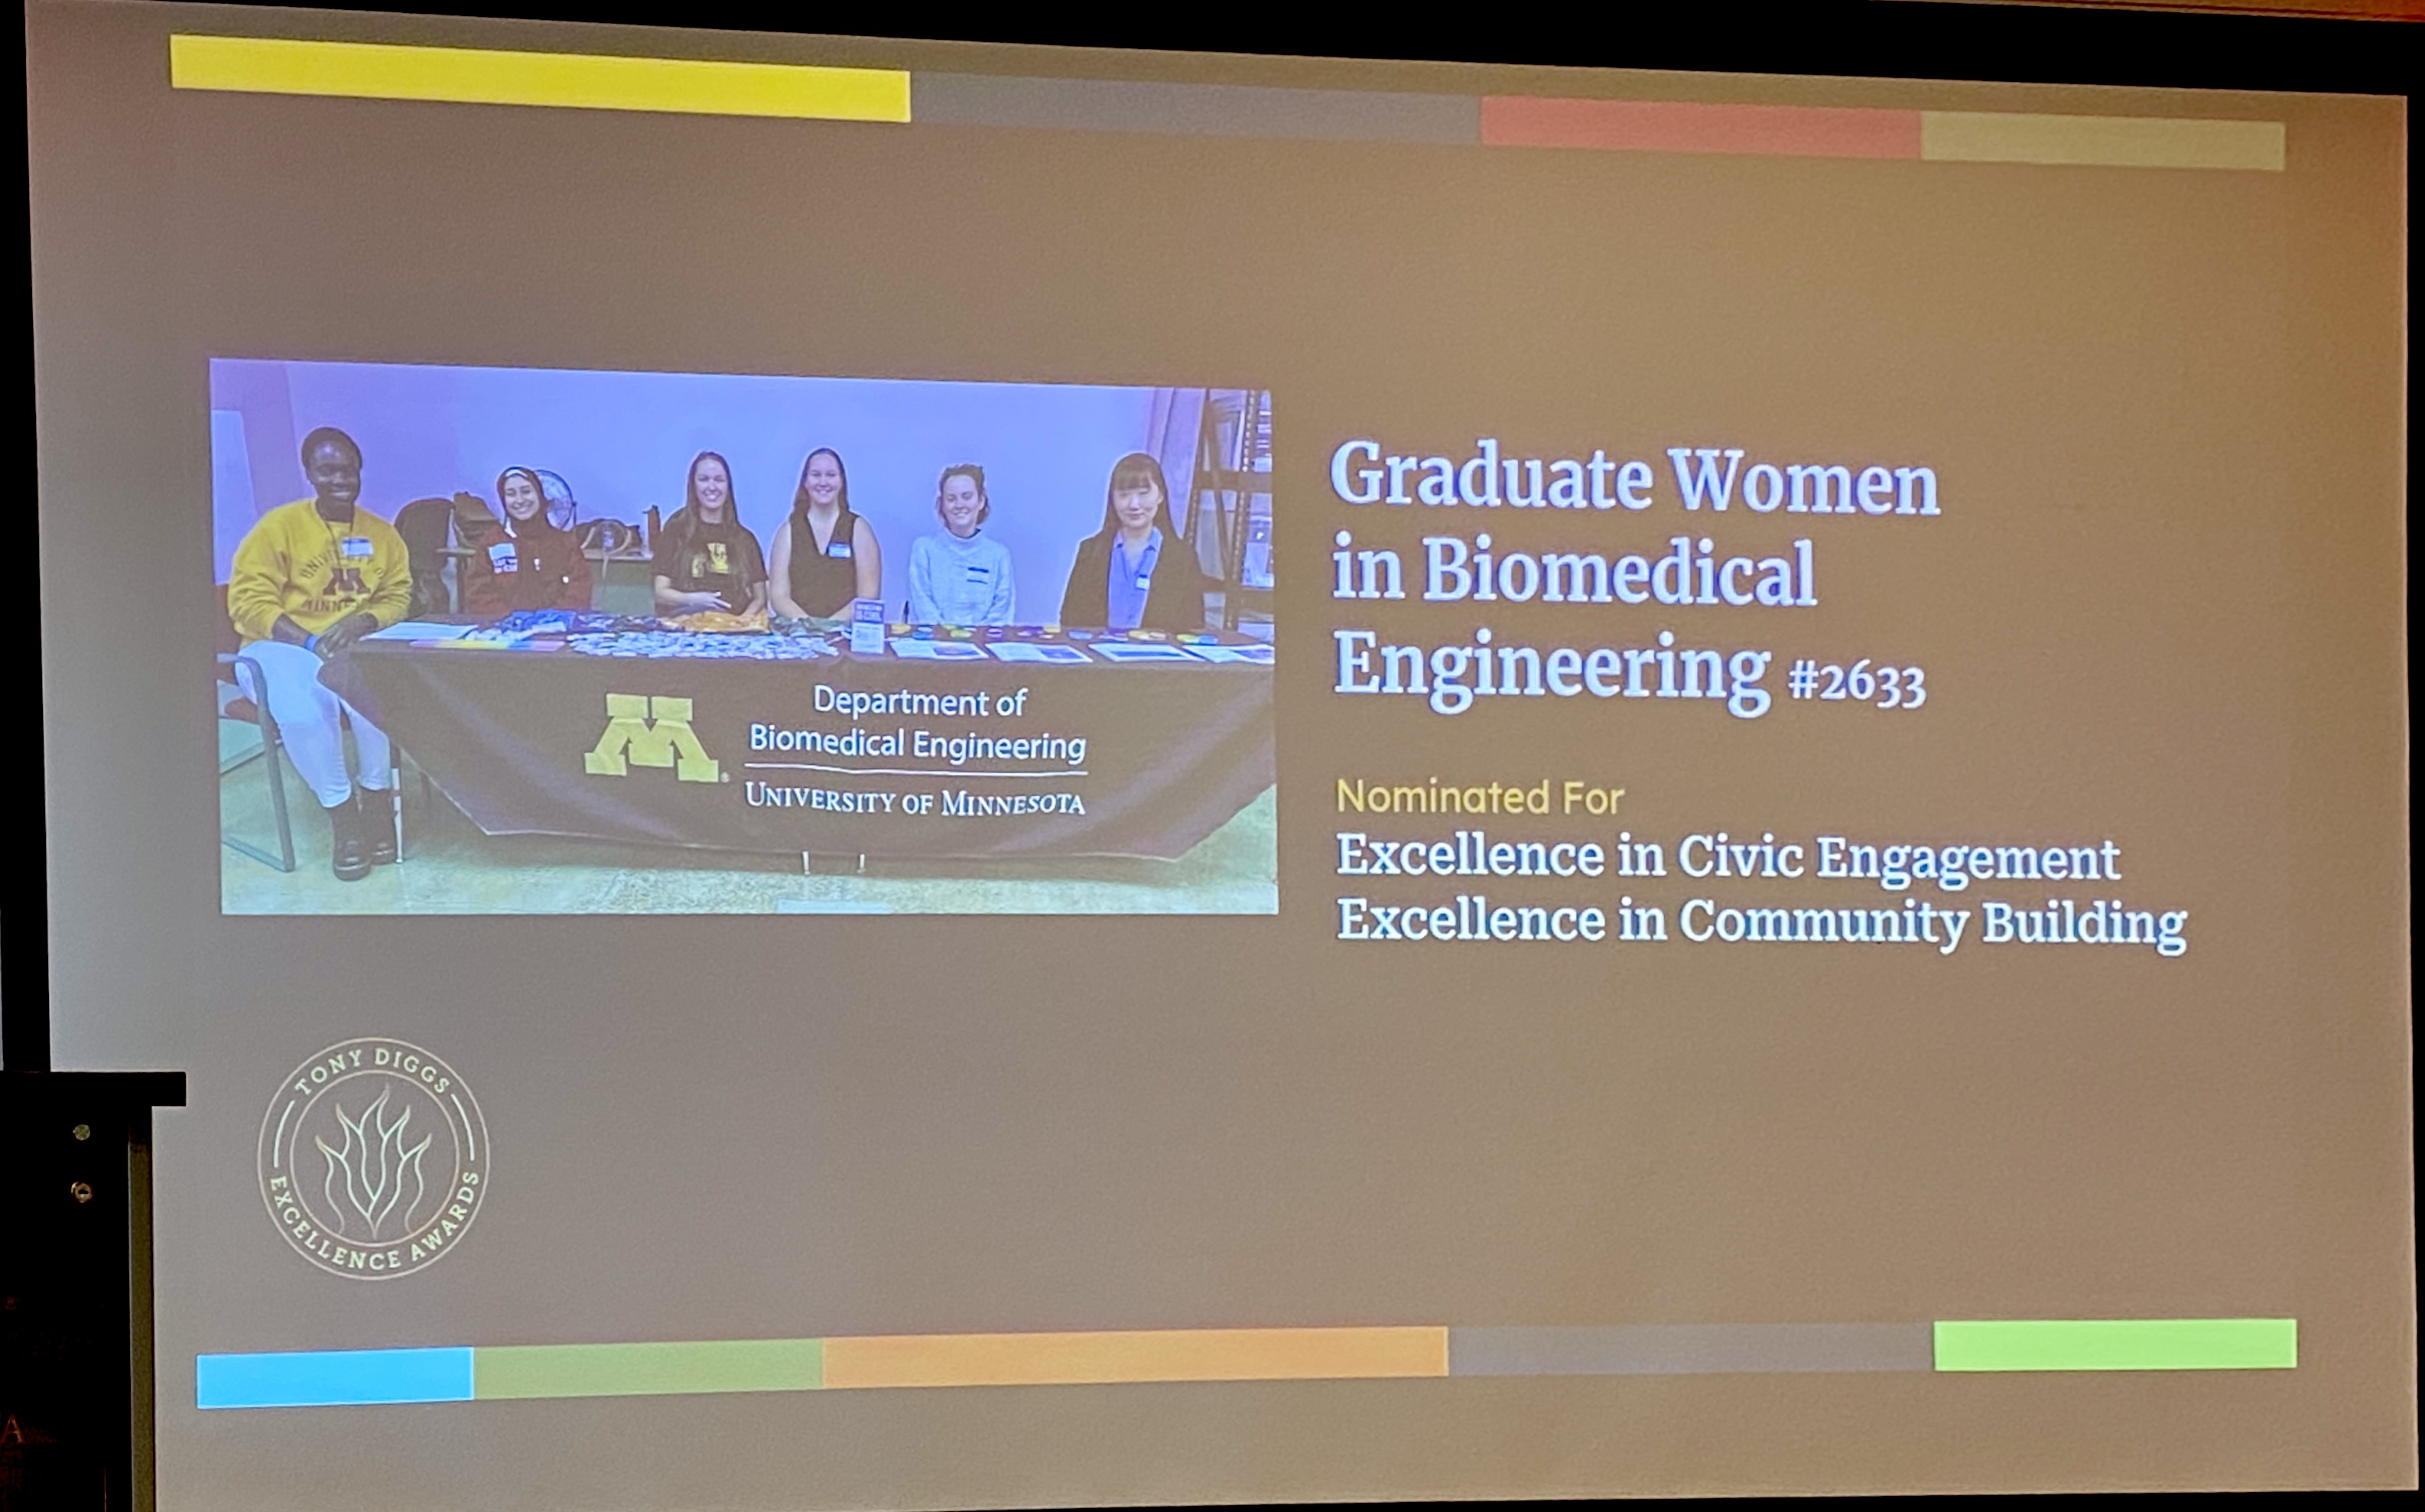 A projected slide shows a photo of several women behind a table.  The text says that GWBME was nominated for Excellence in Civic Engagement and Excellence in Community Building.